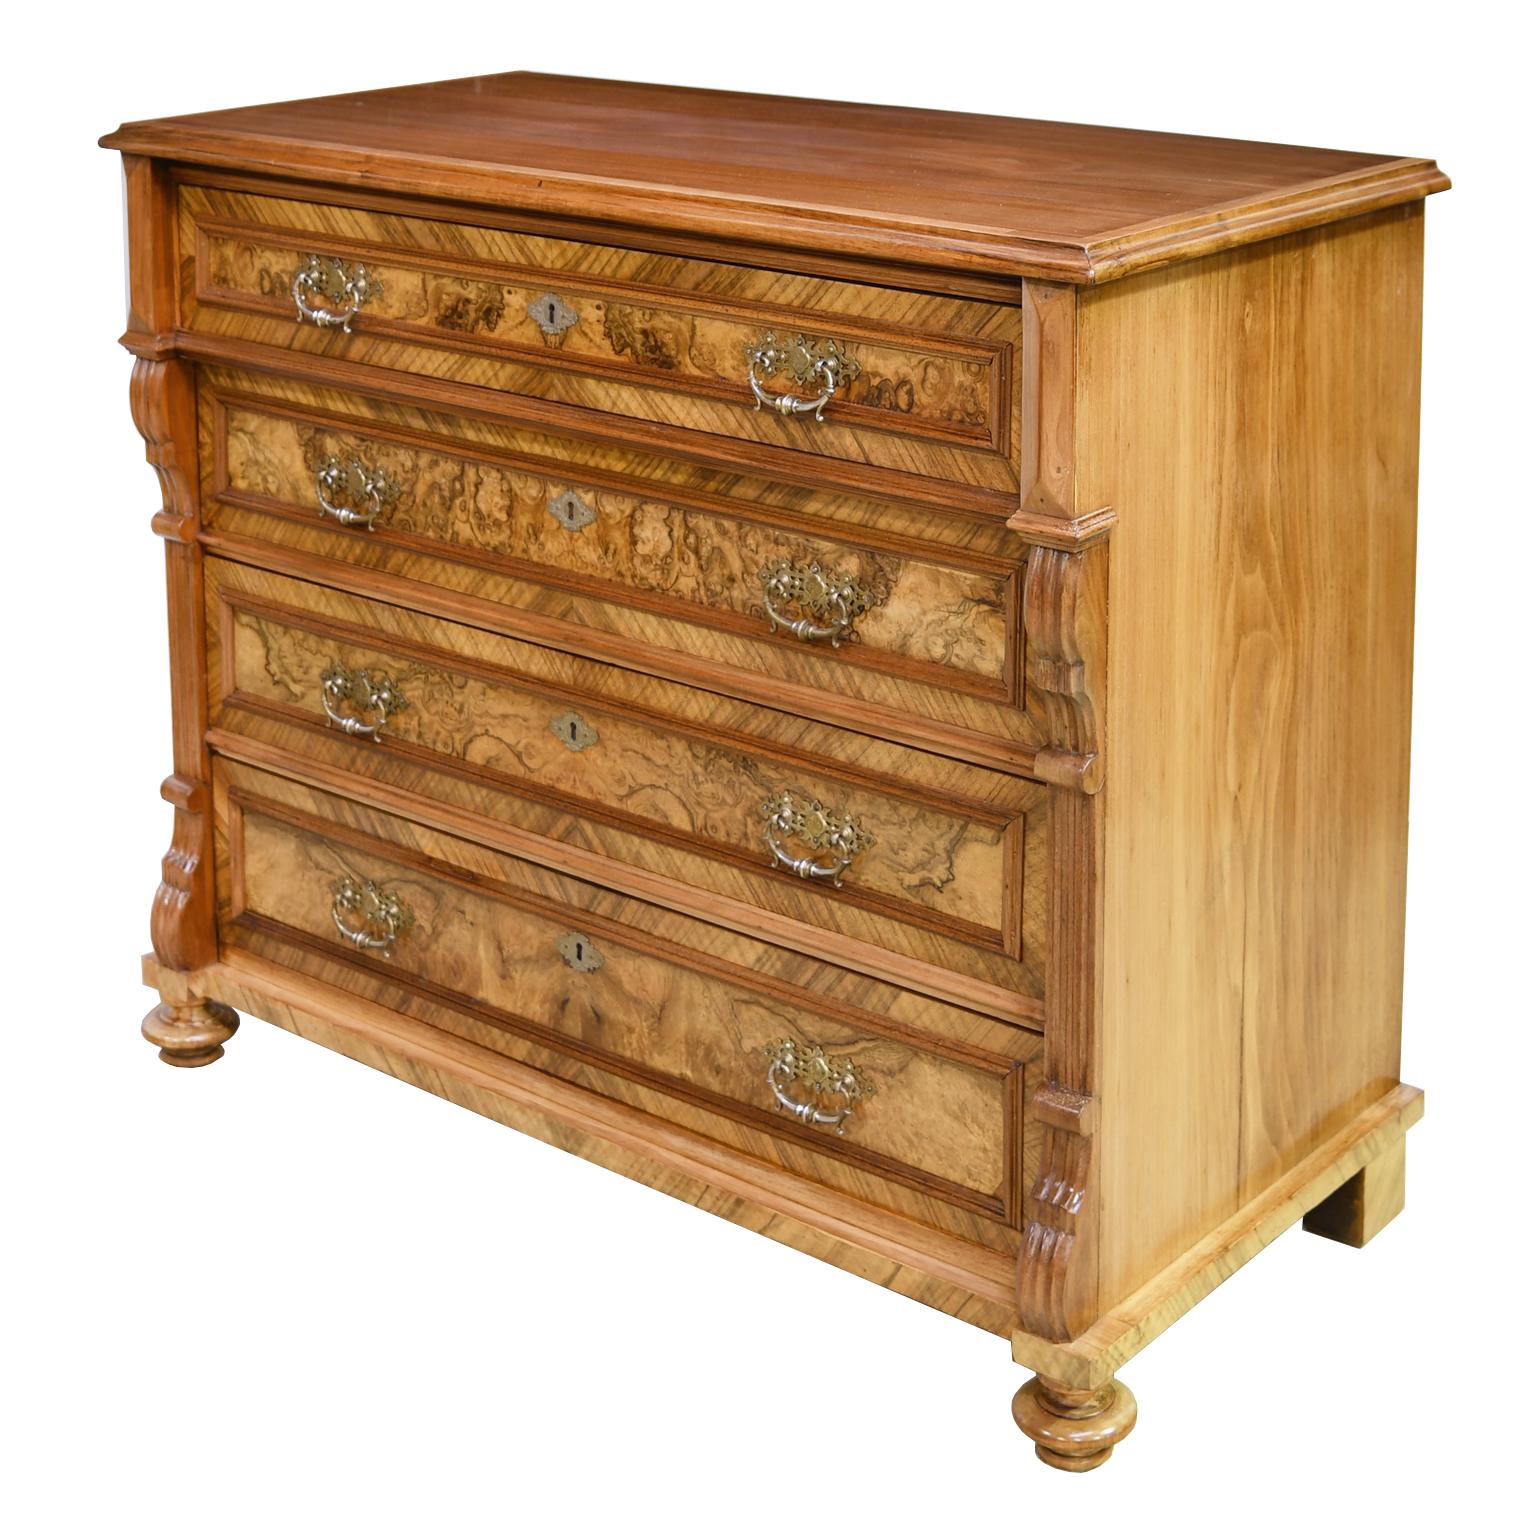 Late Victorian Chest of Drawers in Walnut with Inlays of Burl Walnut, Sweden, circa 1870